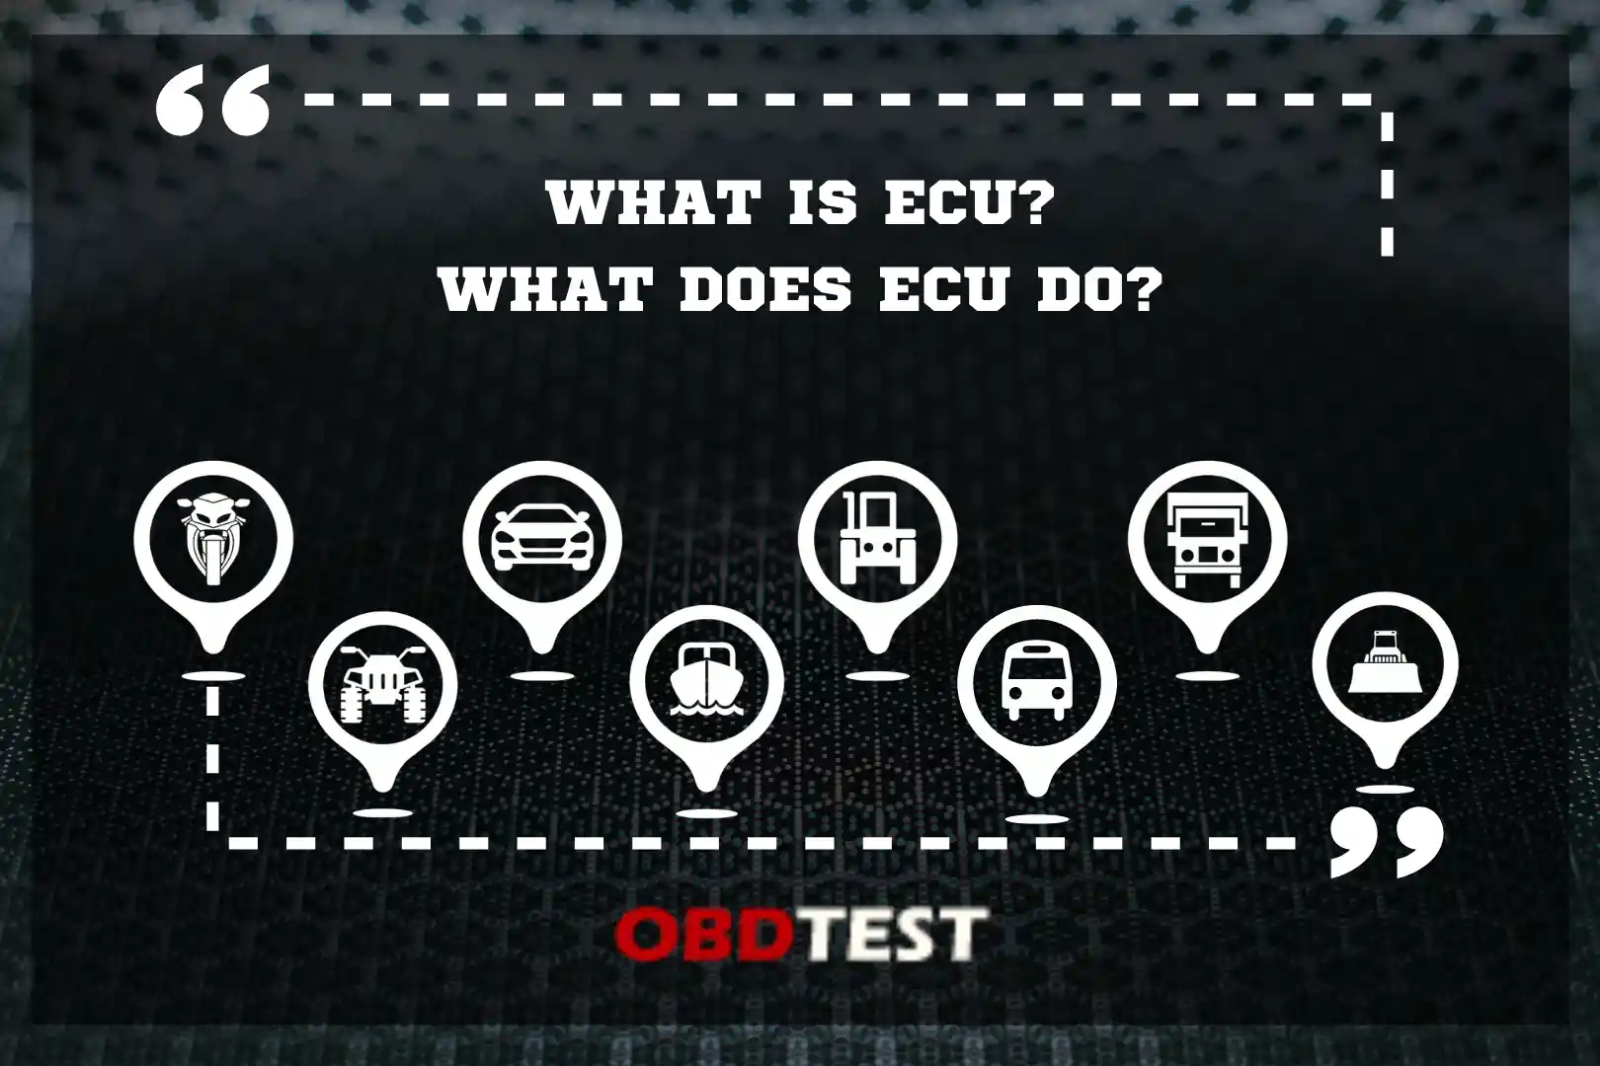 What is ECU? and What does ECU do?